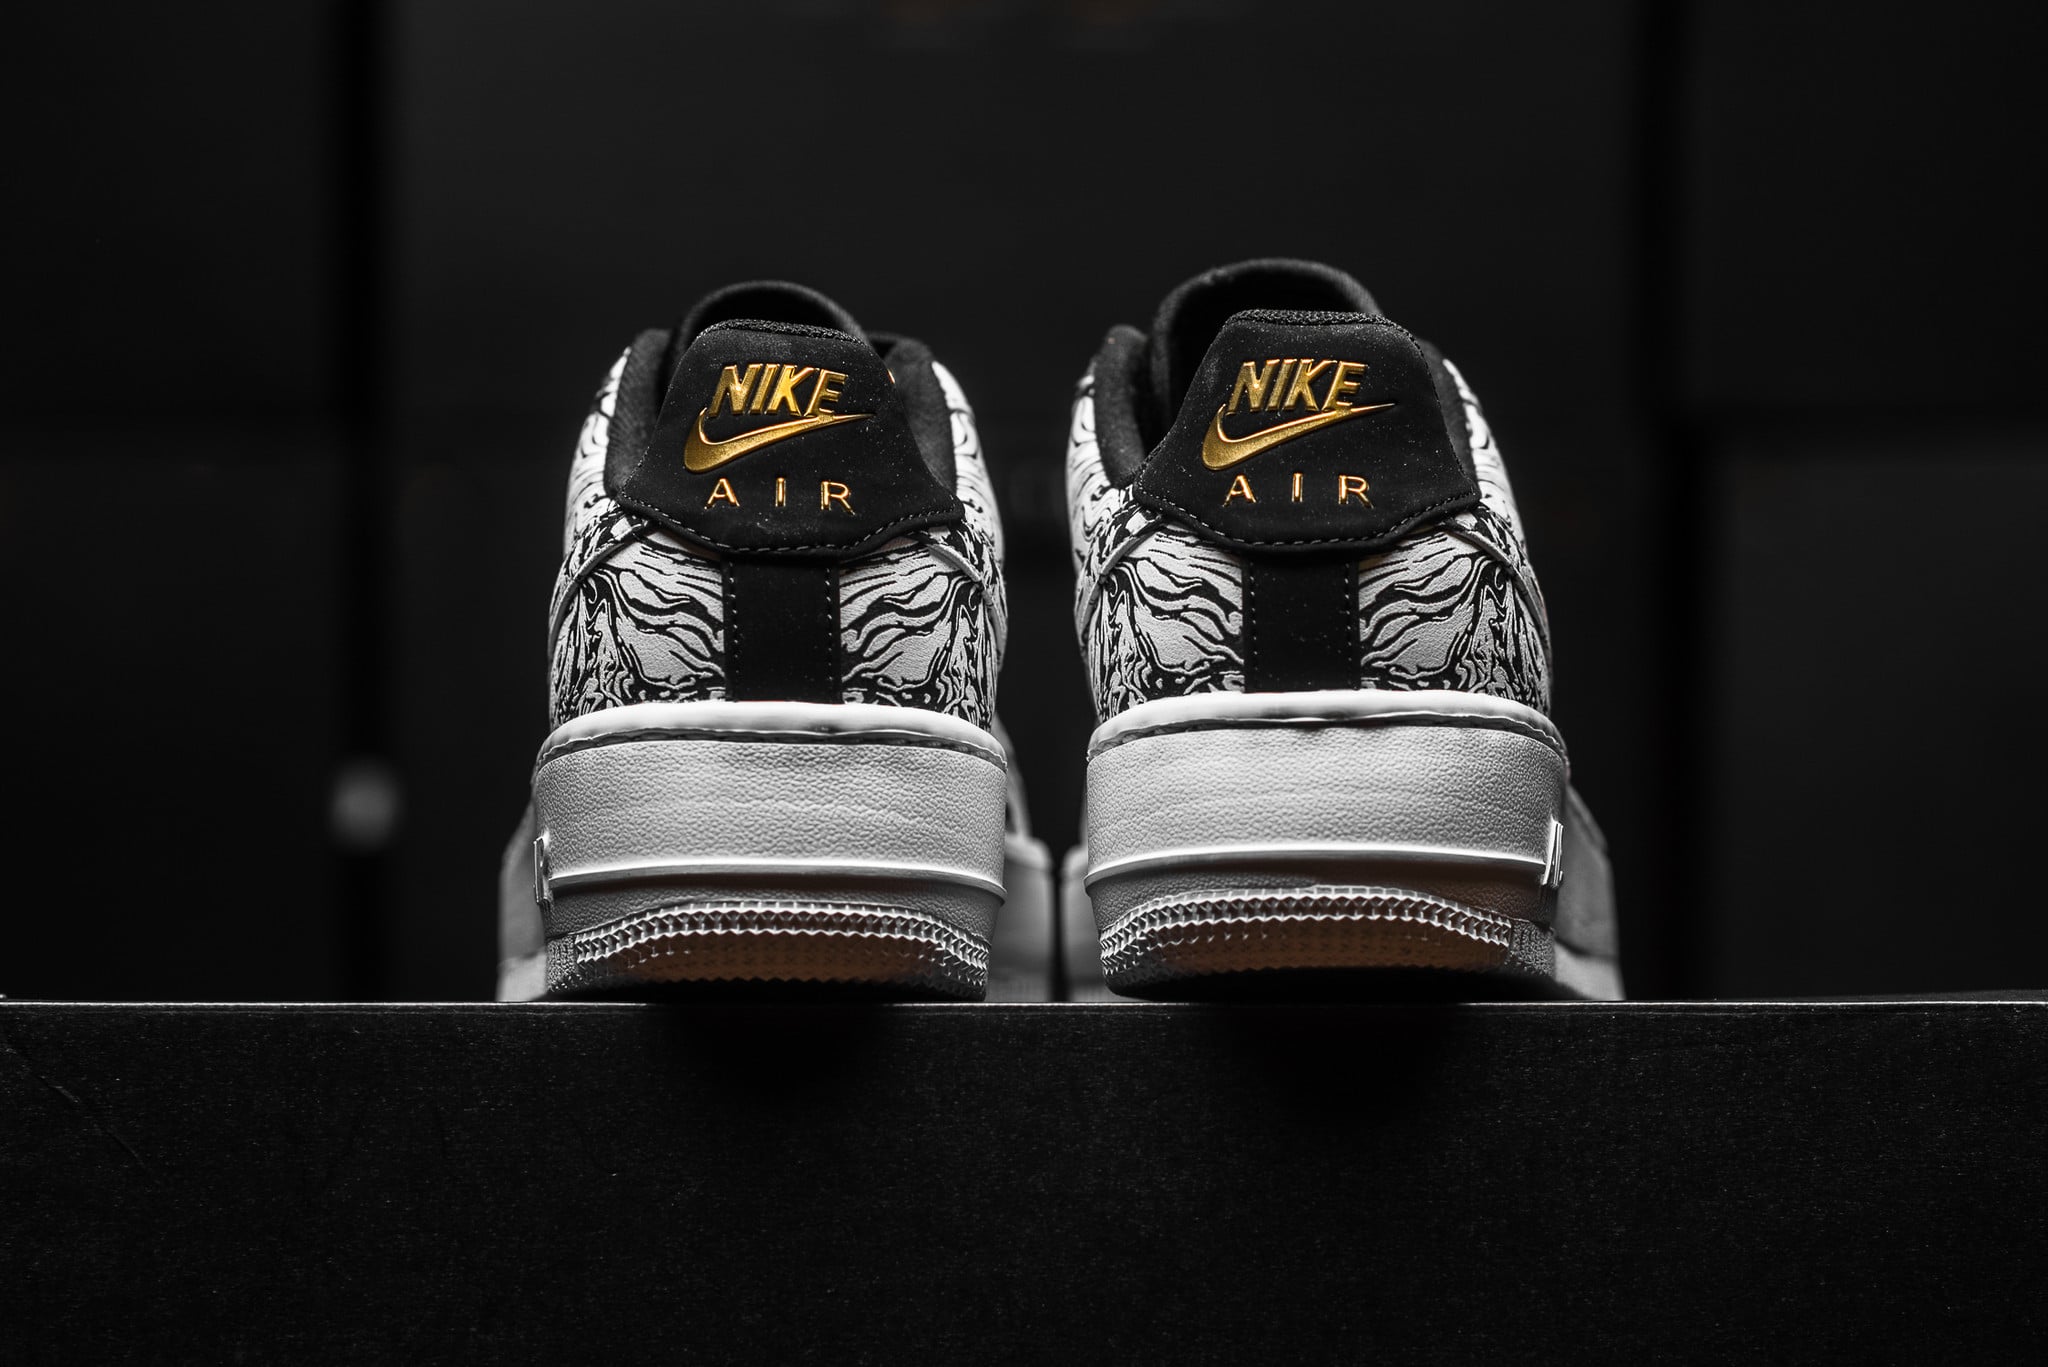 Nike Air Force 1 Black History Month 2017-10